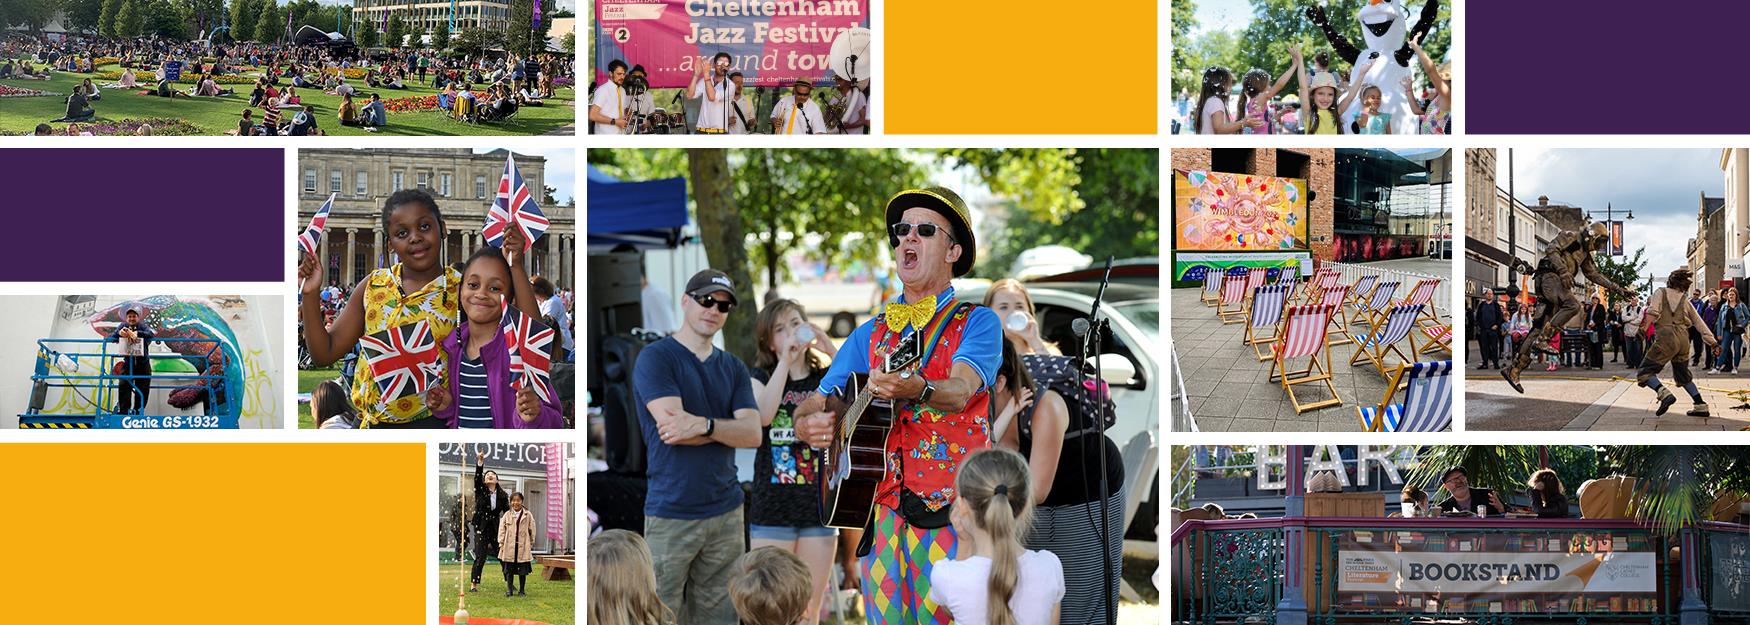 A collage of free events happening in Cheltenham